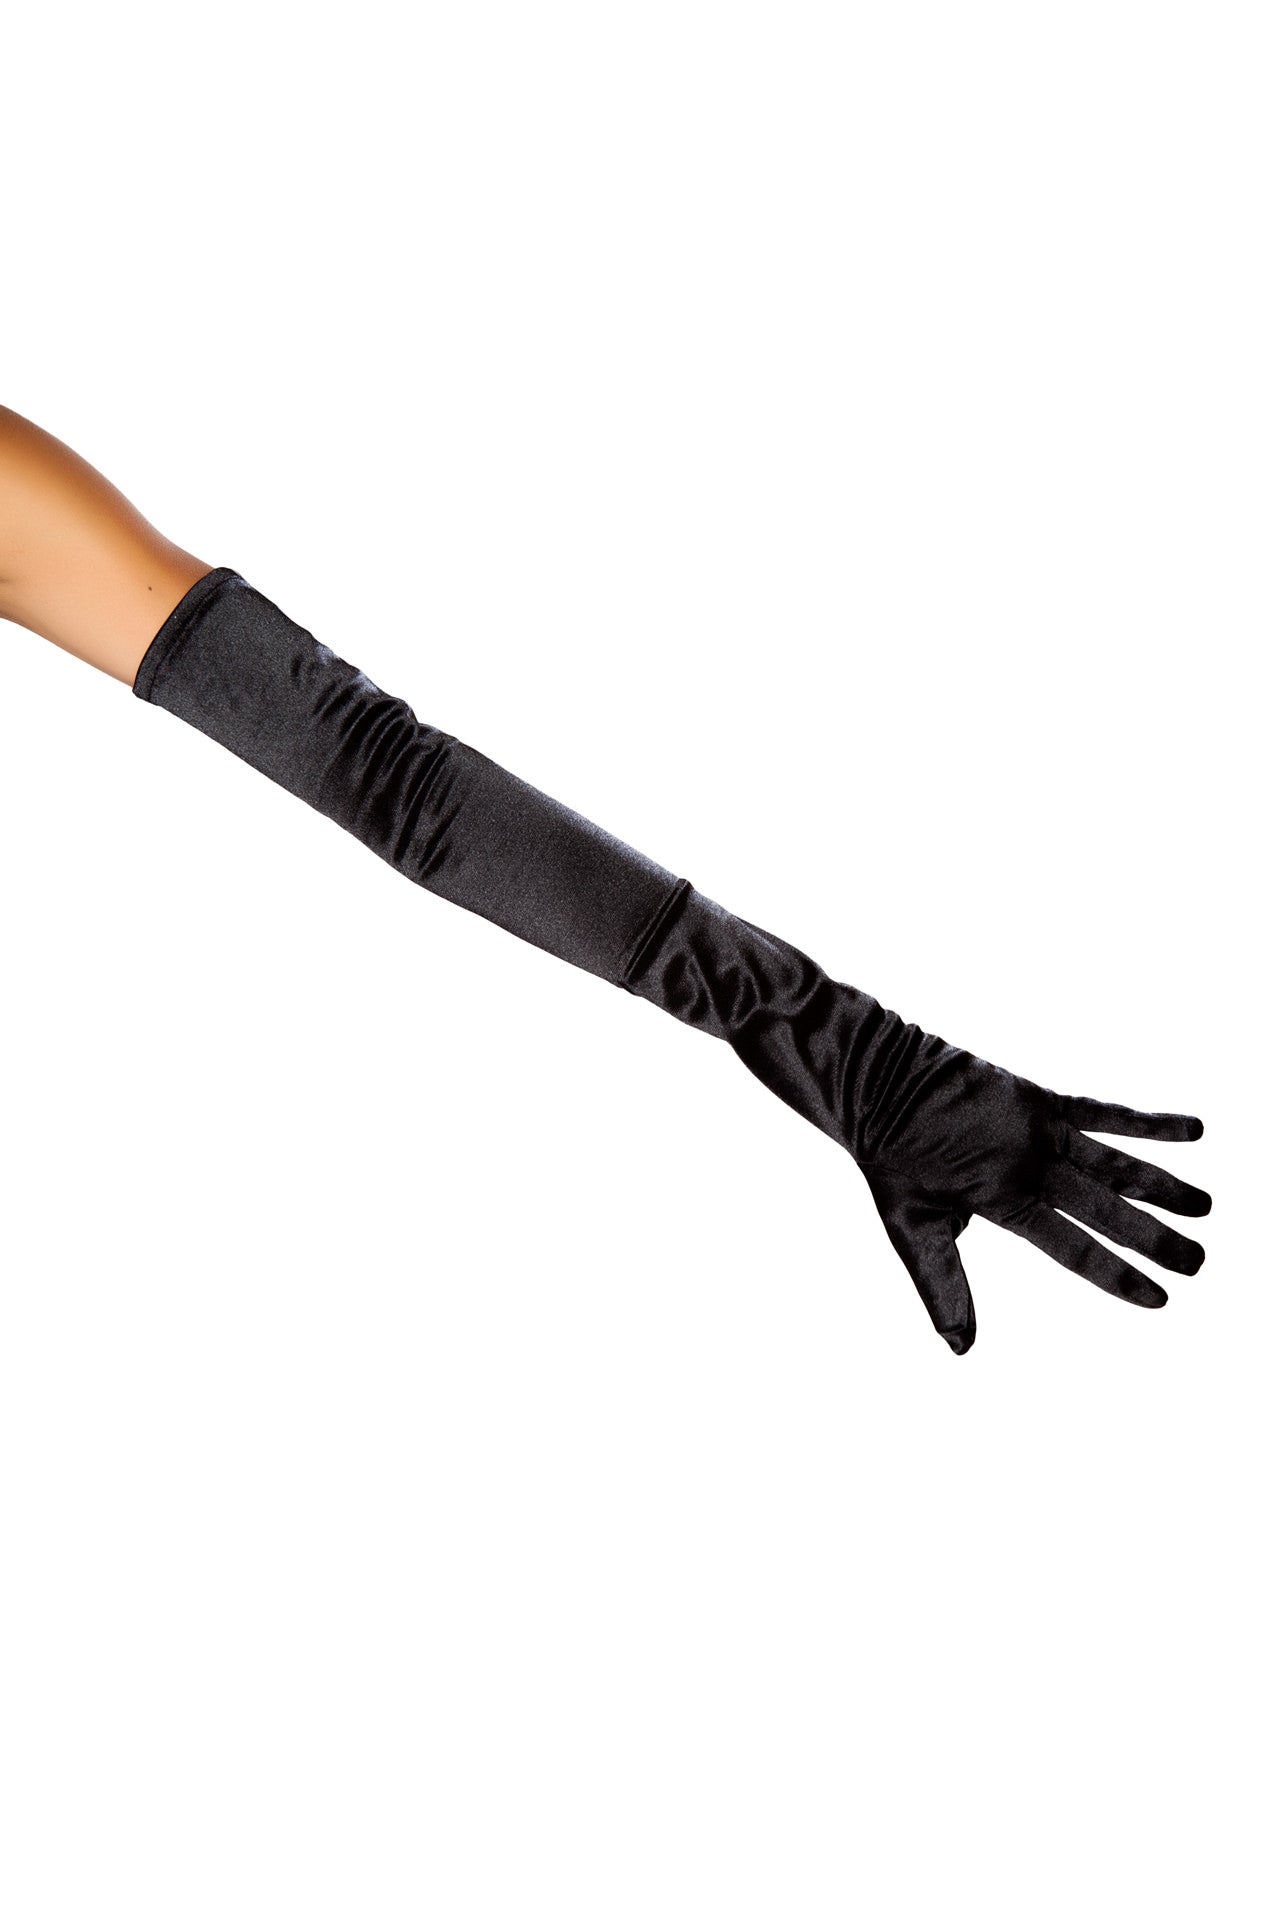 Roma Costume Costume Accessory Stretch Satin Gloves One Size